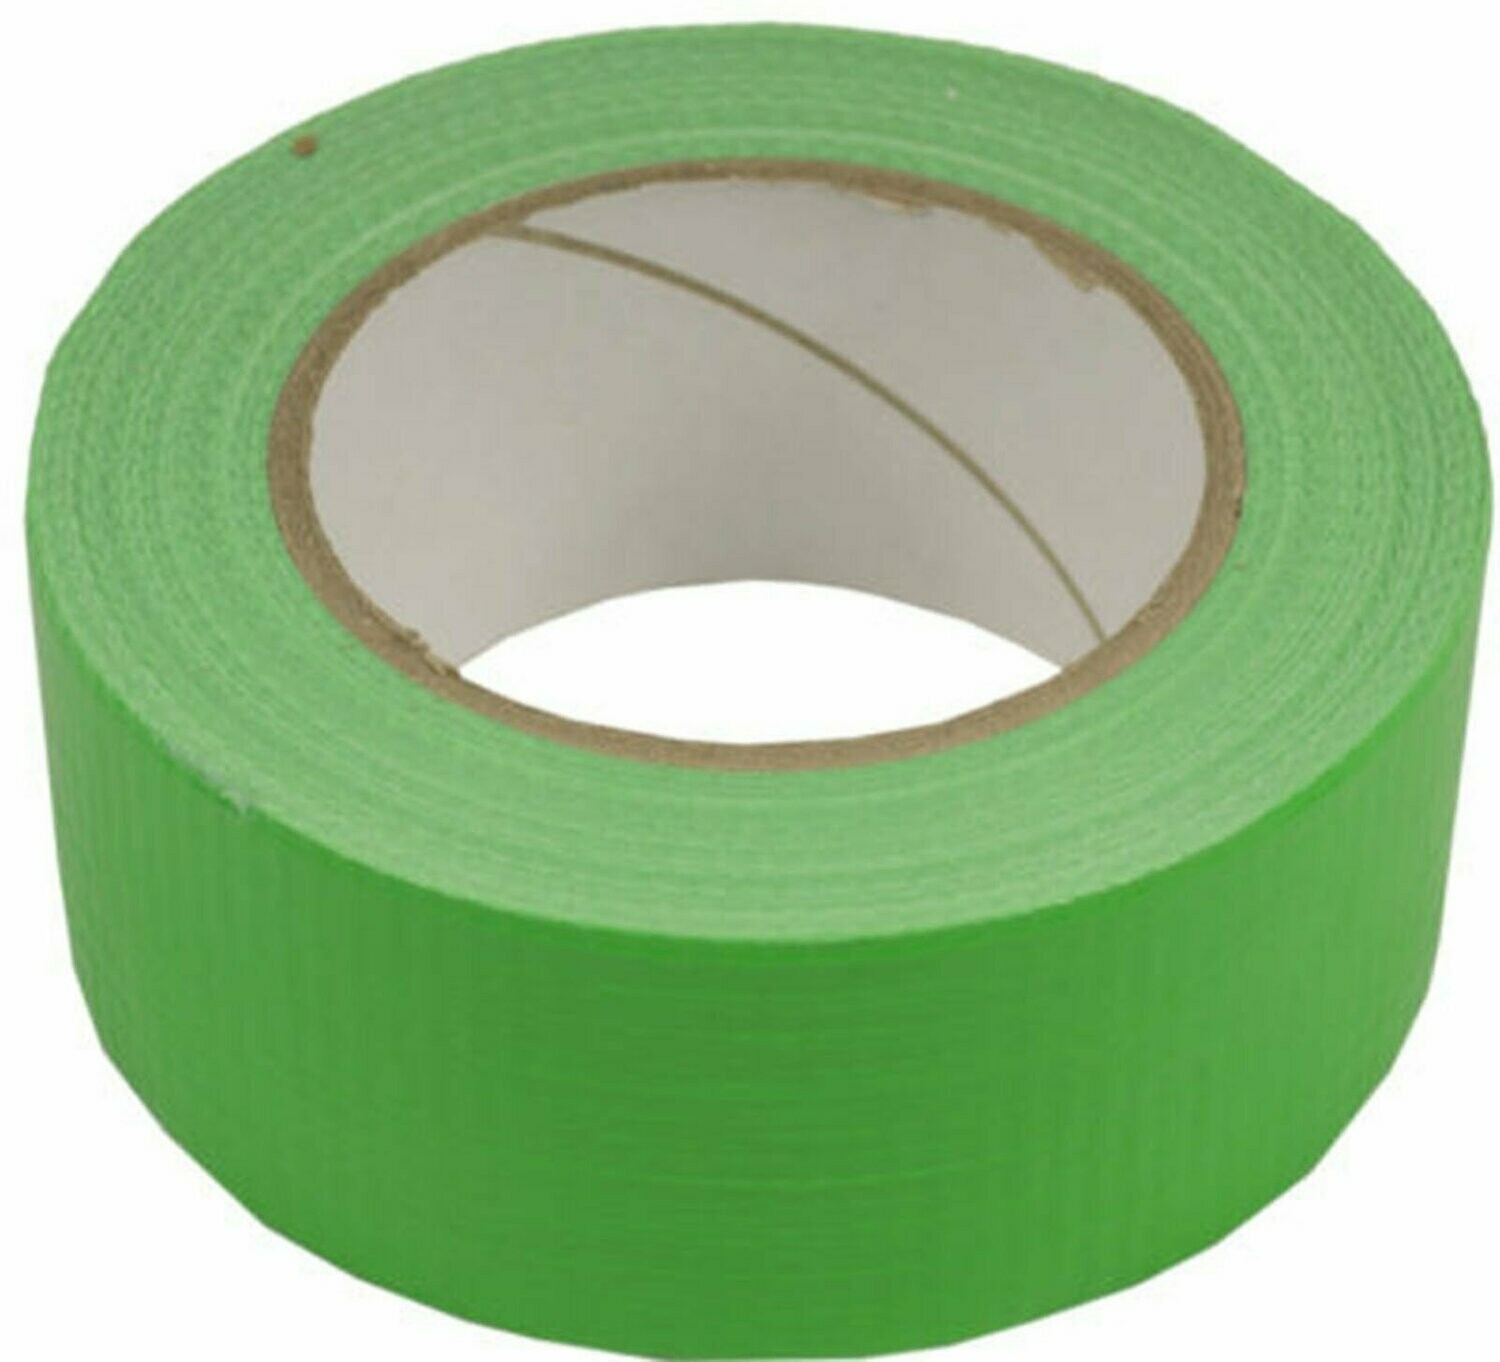 Green Duct Tape, quantity: 5